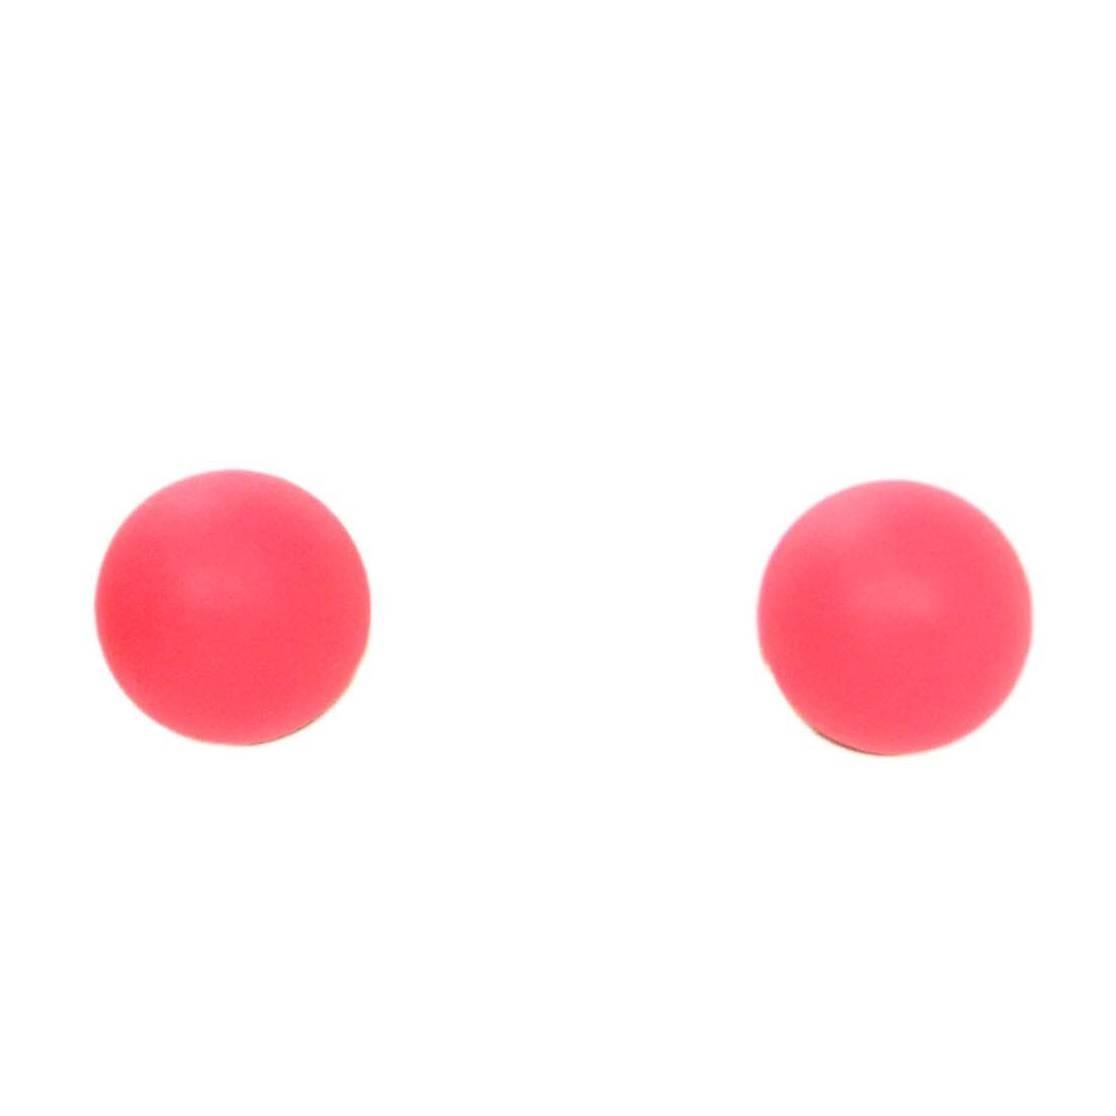 Dior Matte Coral Pink Miss en Dior Tribal Earrings
Color: Bright coral pink
Hardware: Silvertone
Materials: Metal and coated metal
Closure: Pierced back with smaller neon pink ball at end
Stamp: Dior
Overall Condition: Excellent pre-owned